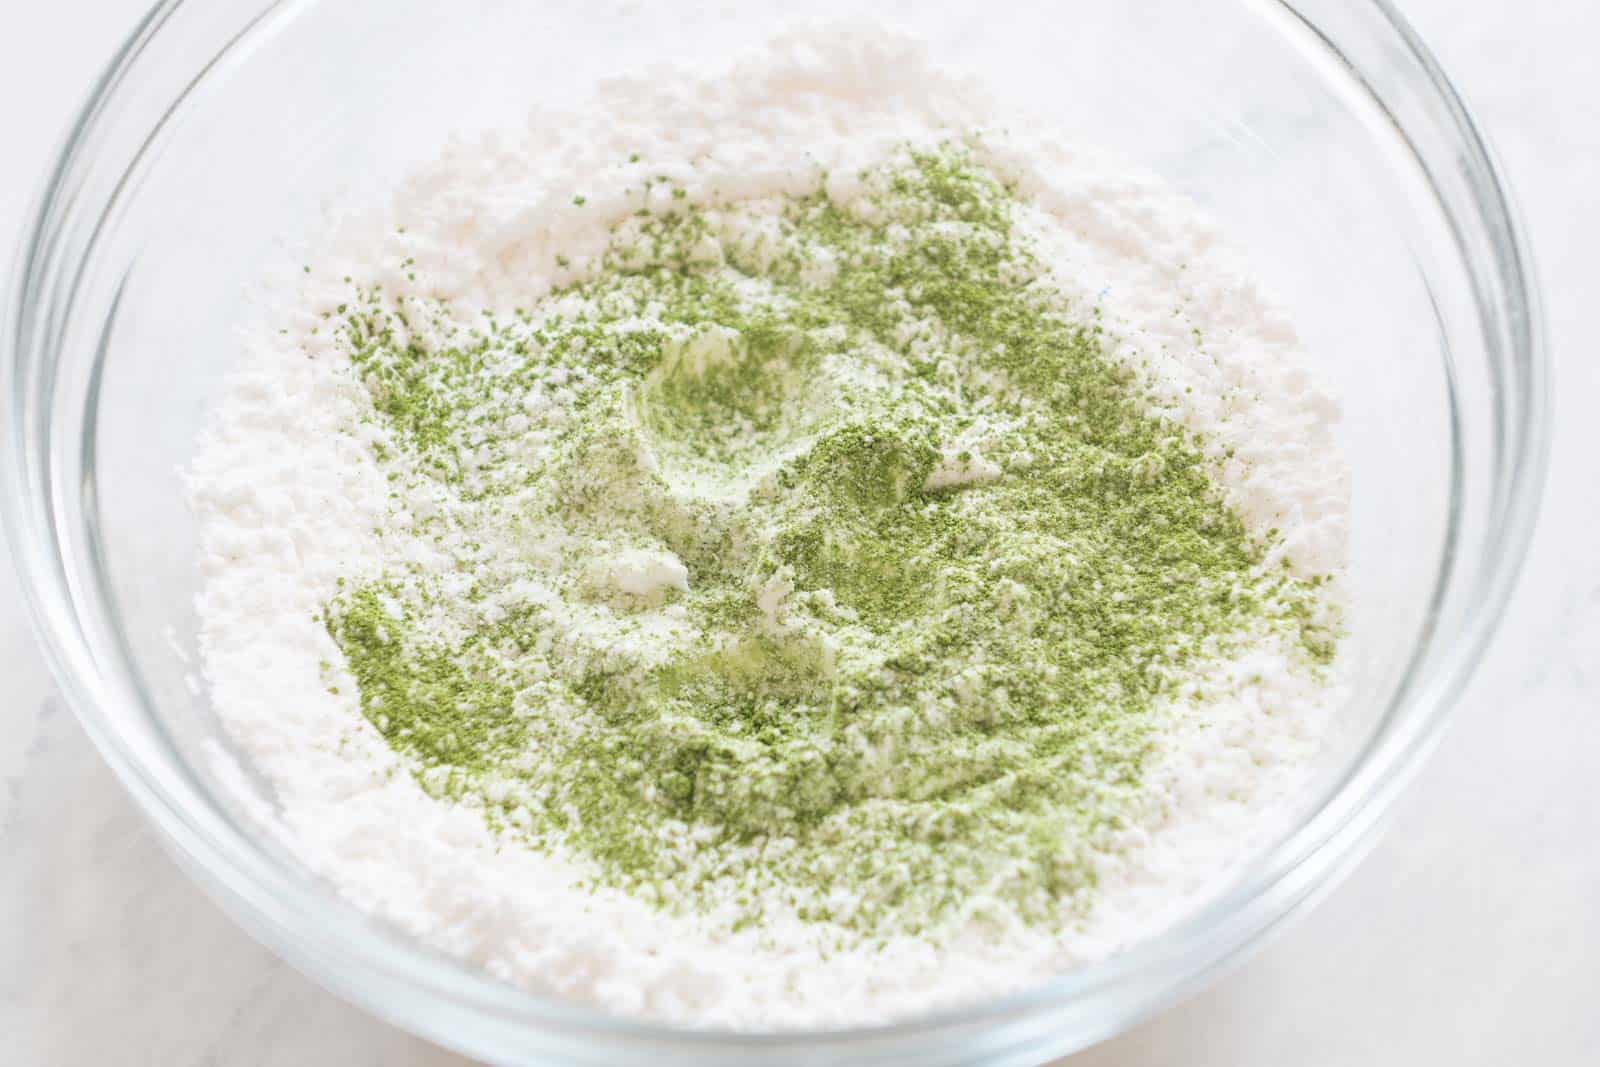 Matcha powder sifted over starches